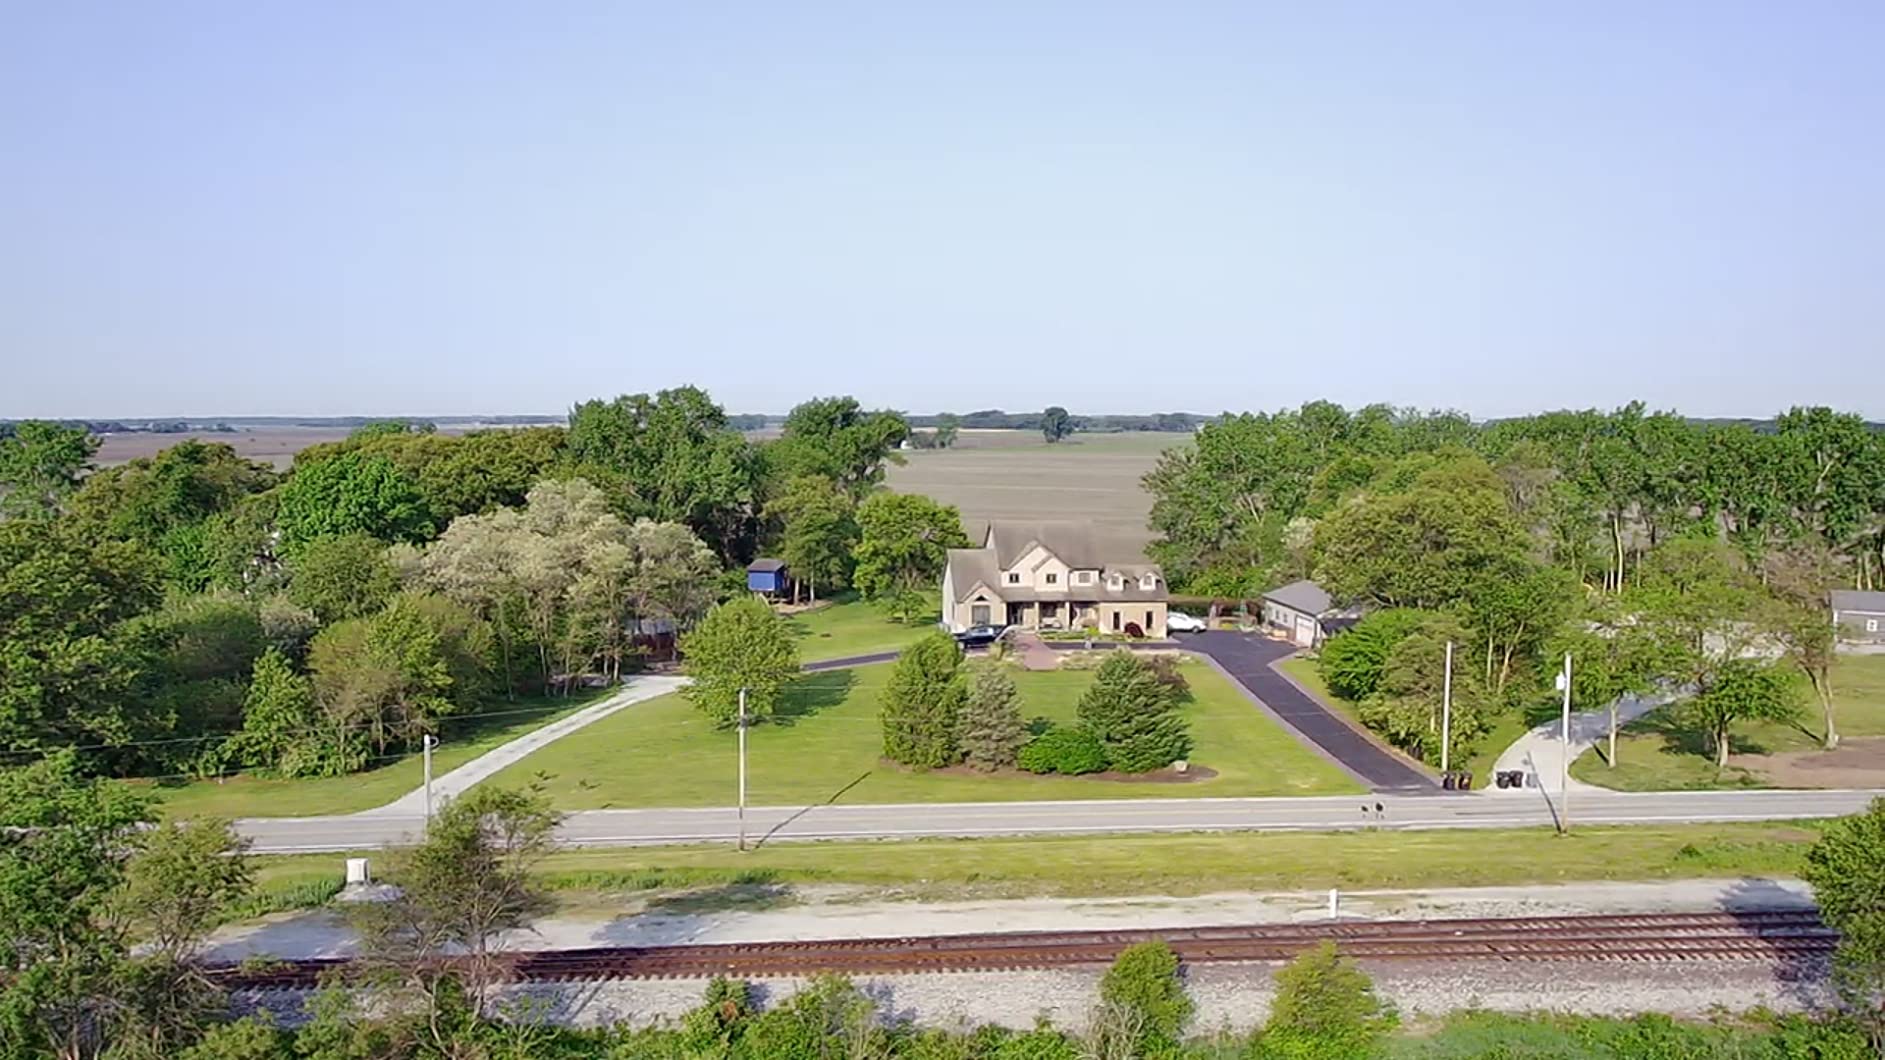 The Benefits of Using Ruko Drones for Real Estate Photography